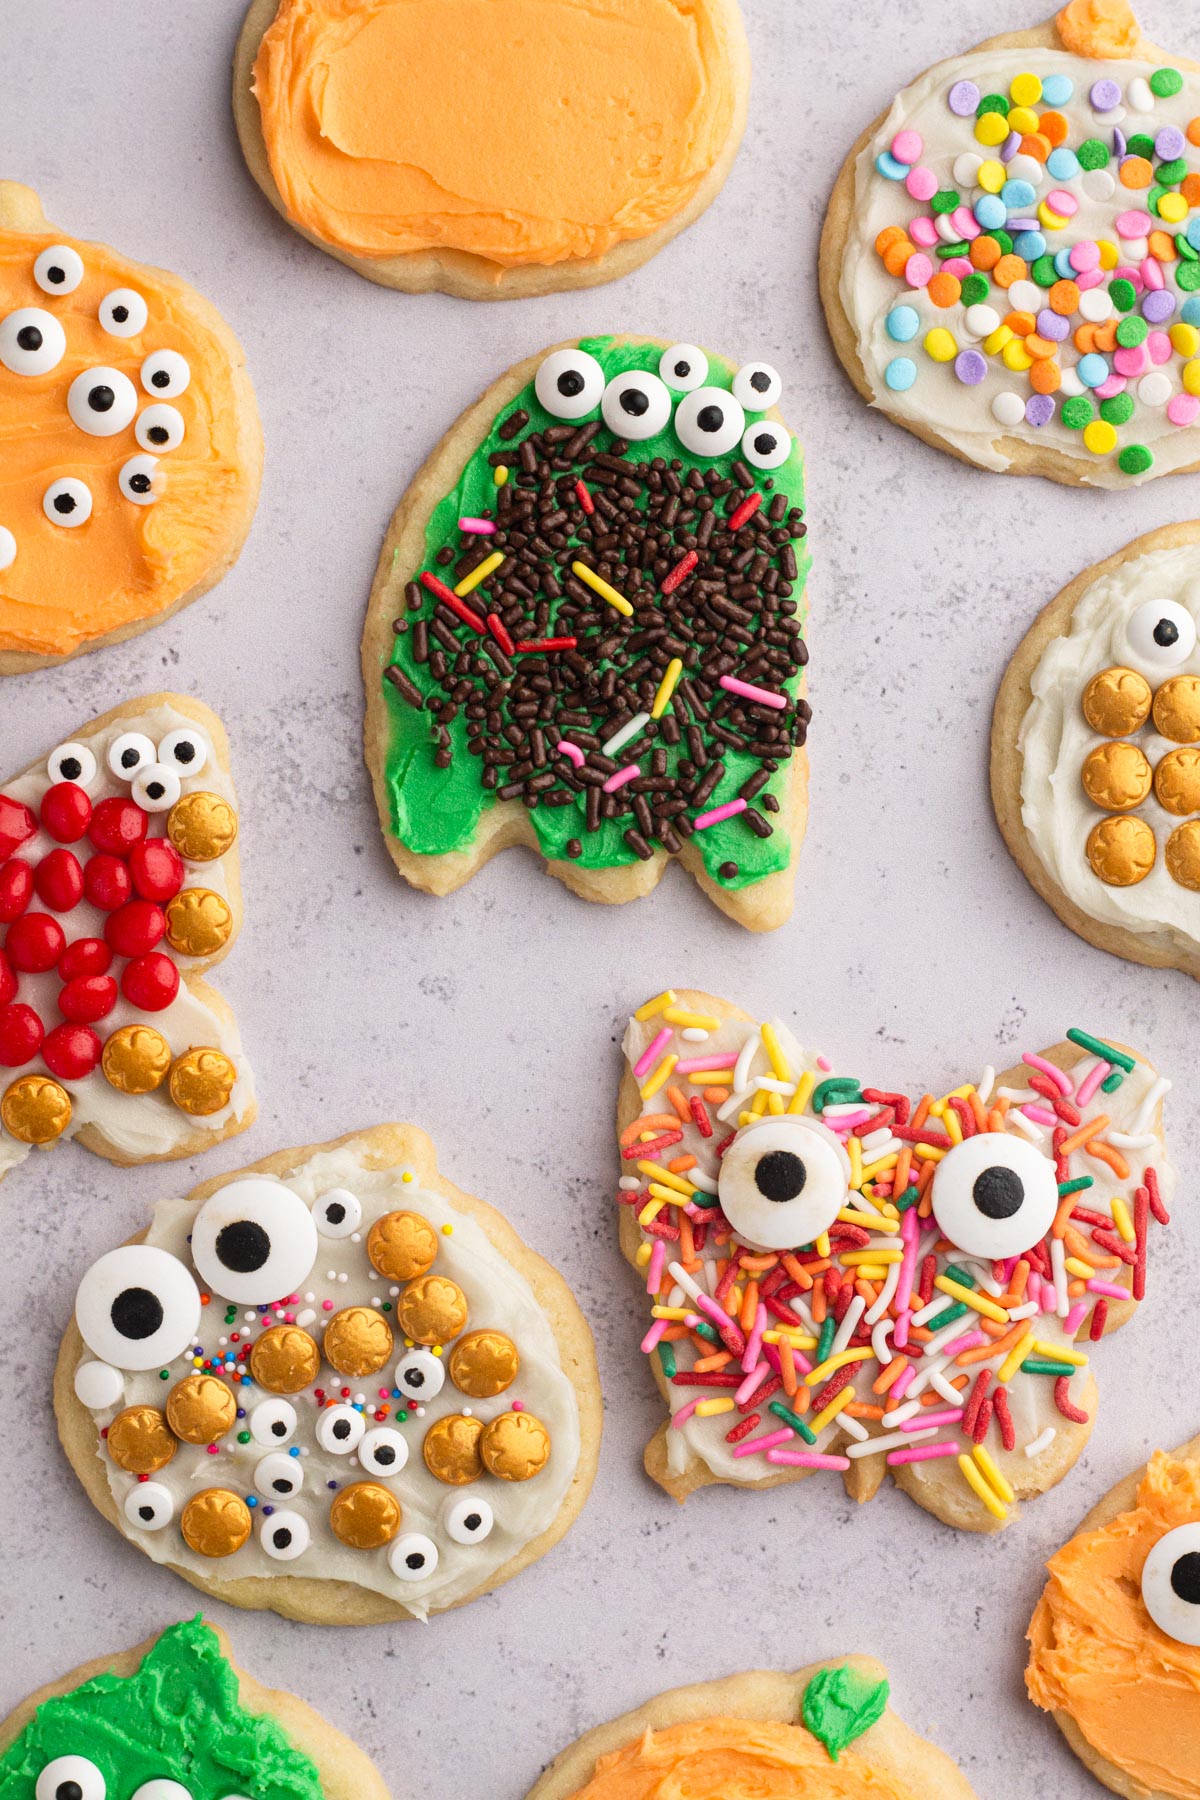 Halloween cut-out sugar cookies decorated by children using buttercream frosting and colorful assorted sprinkles.